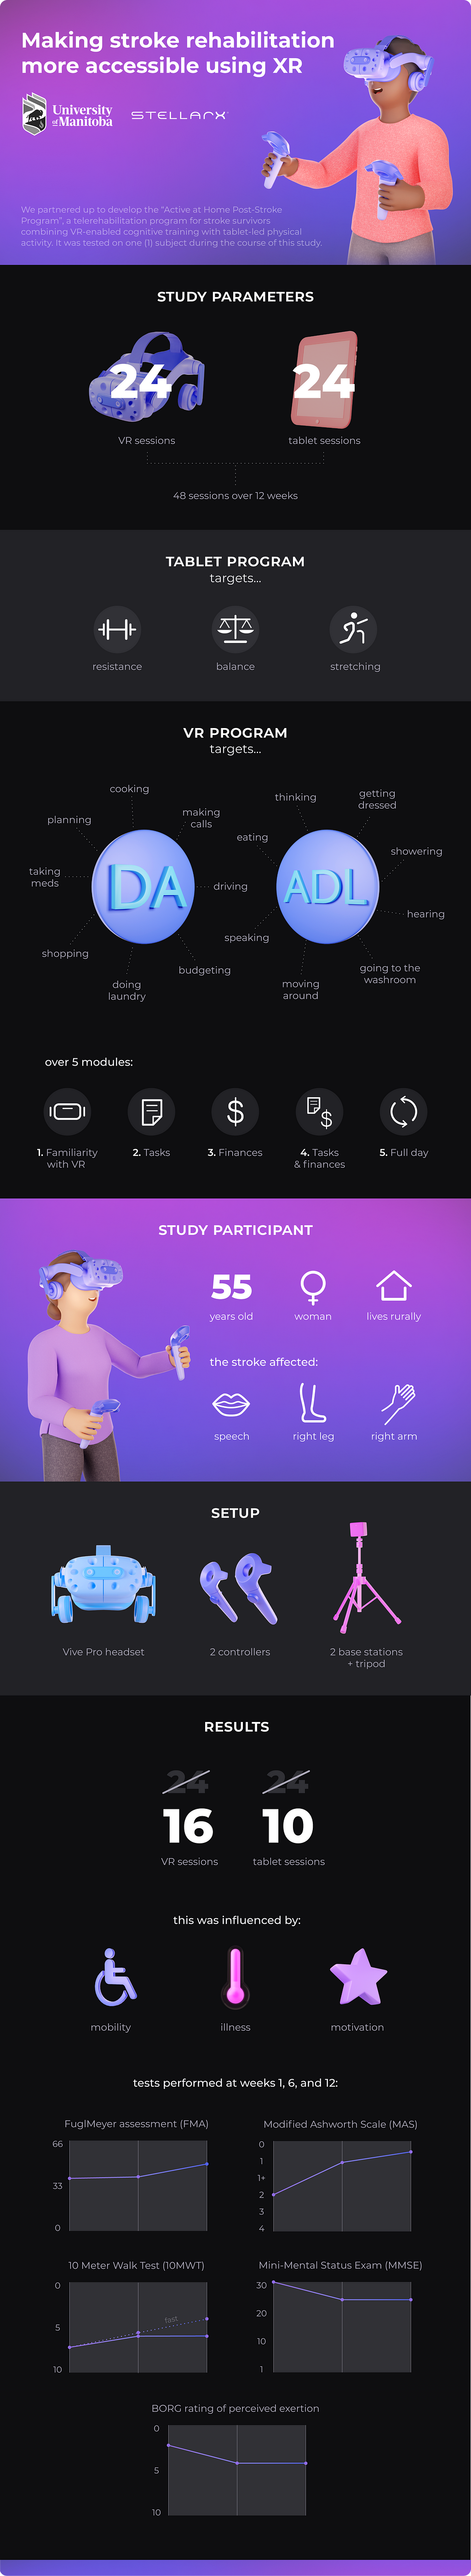 Infographic showing University of Manitoba’s study with StellarX on the effectiveness on VR for stroke rehabilitation. Breaks down information on the study participant, the approach, and the results.